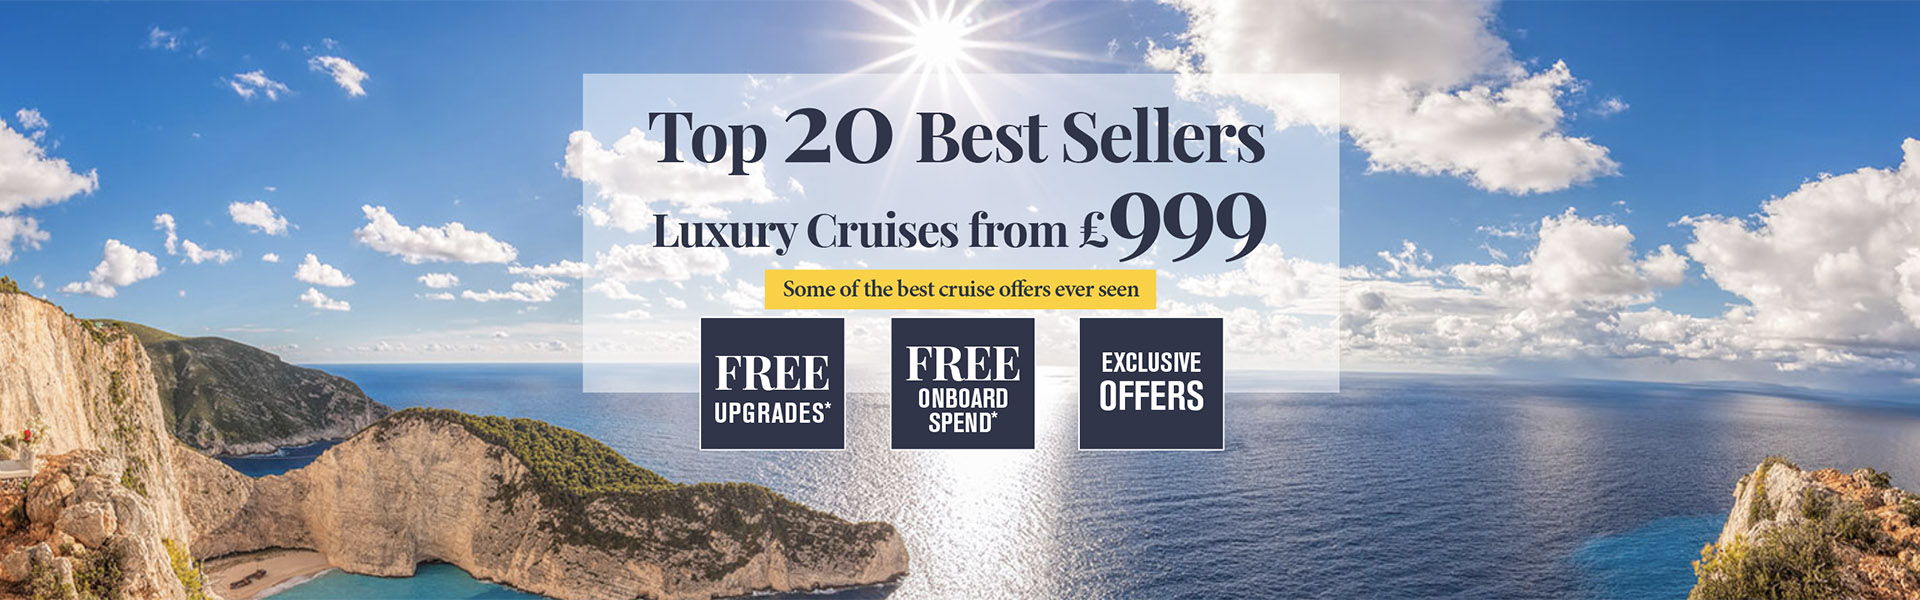 Top 20 Best Selling Cruise Deals